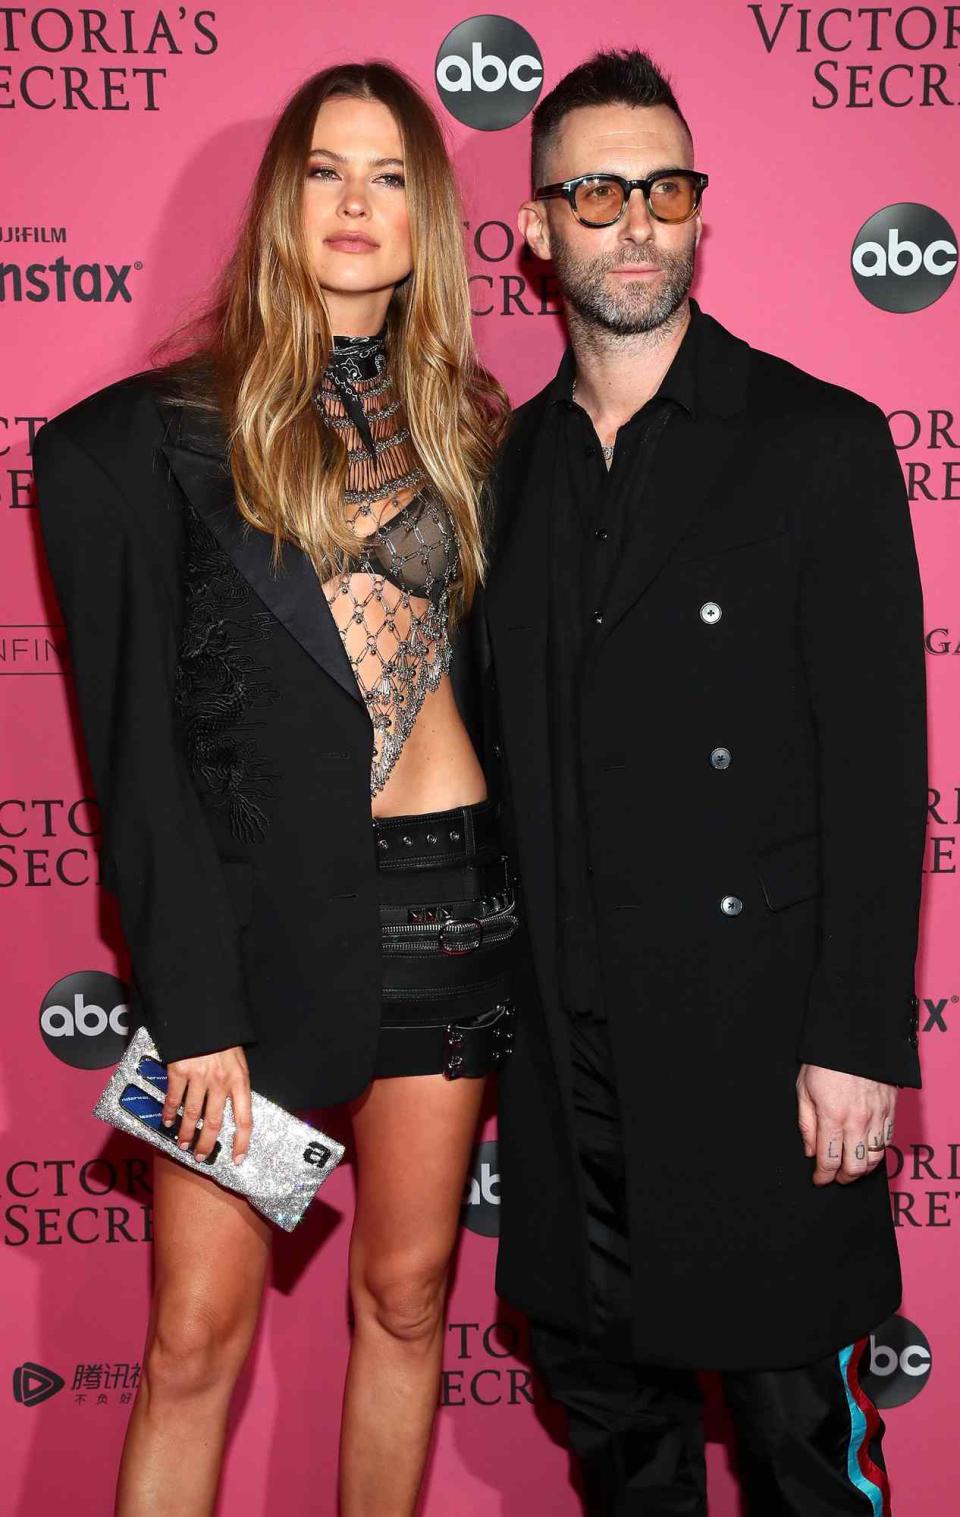 Behati Prinsloo and Adam Levine attends the 2018 Victoria's Secret Fashion Show After Party on November 8, 2018 in New York City